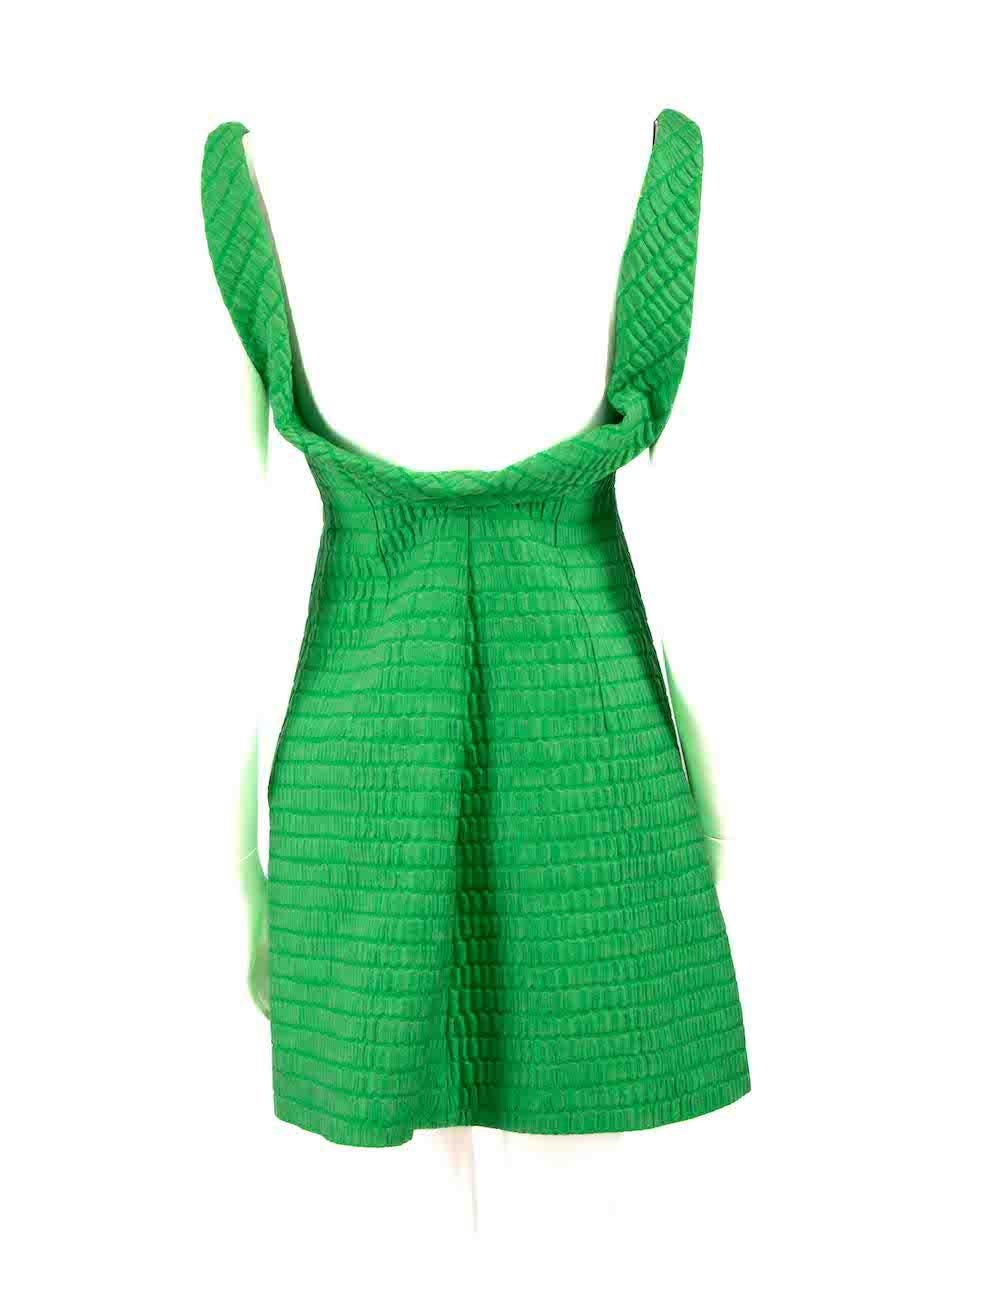 Emilia Wickstead Green Textured Mini Dress Size S In Good Condition For Sale In London, GB